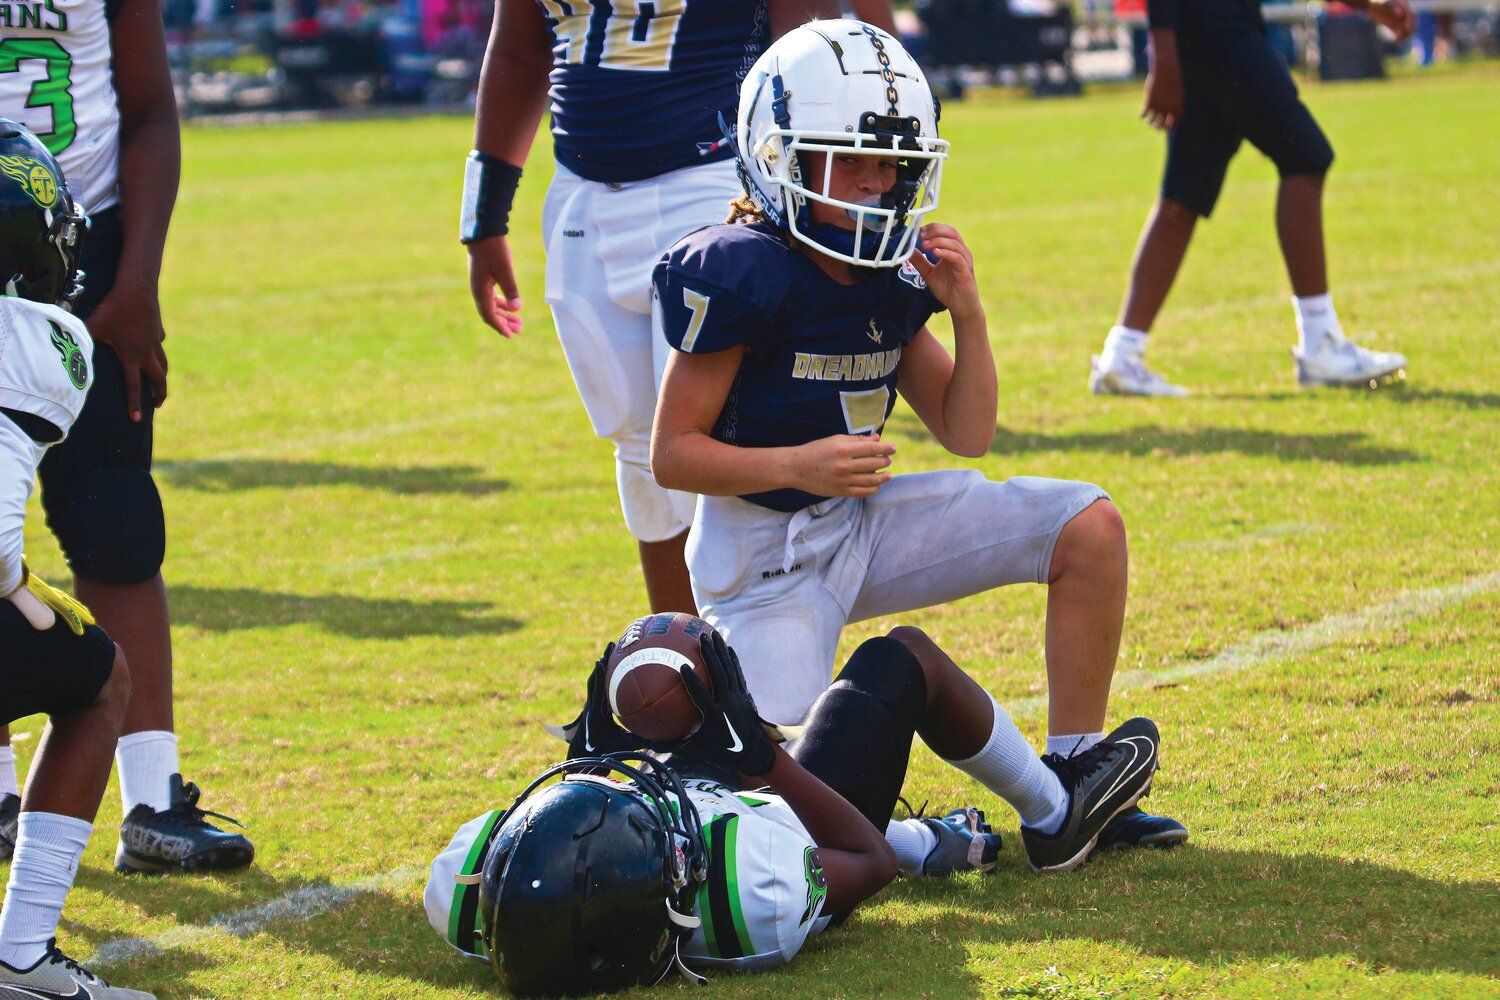 Fleming Island Dreadnaughts 11-under defender Brandon Mcintosh blasted through for this second-half sack in Dreadnaughts dominating 38-6 win over Titletown Titans, the defending Pop Warner national champs.